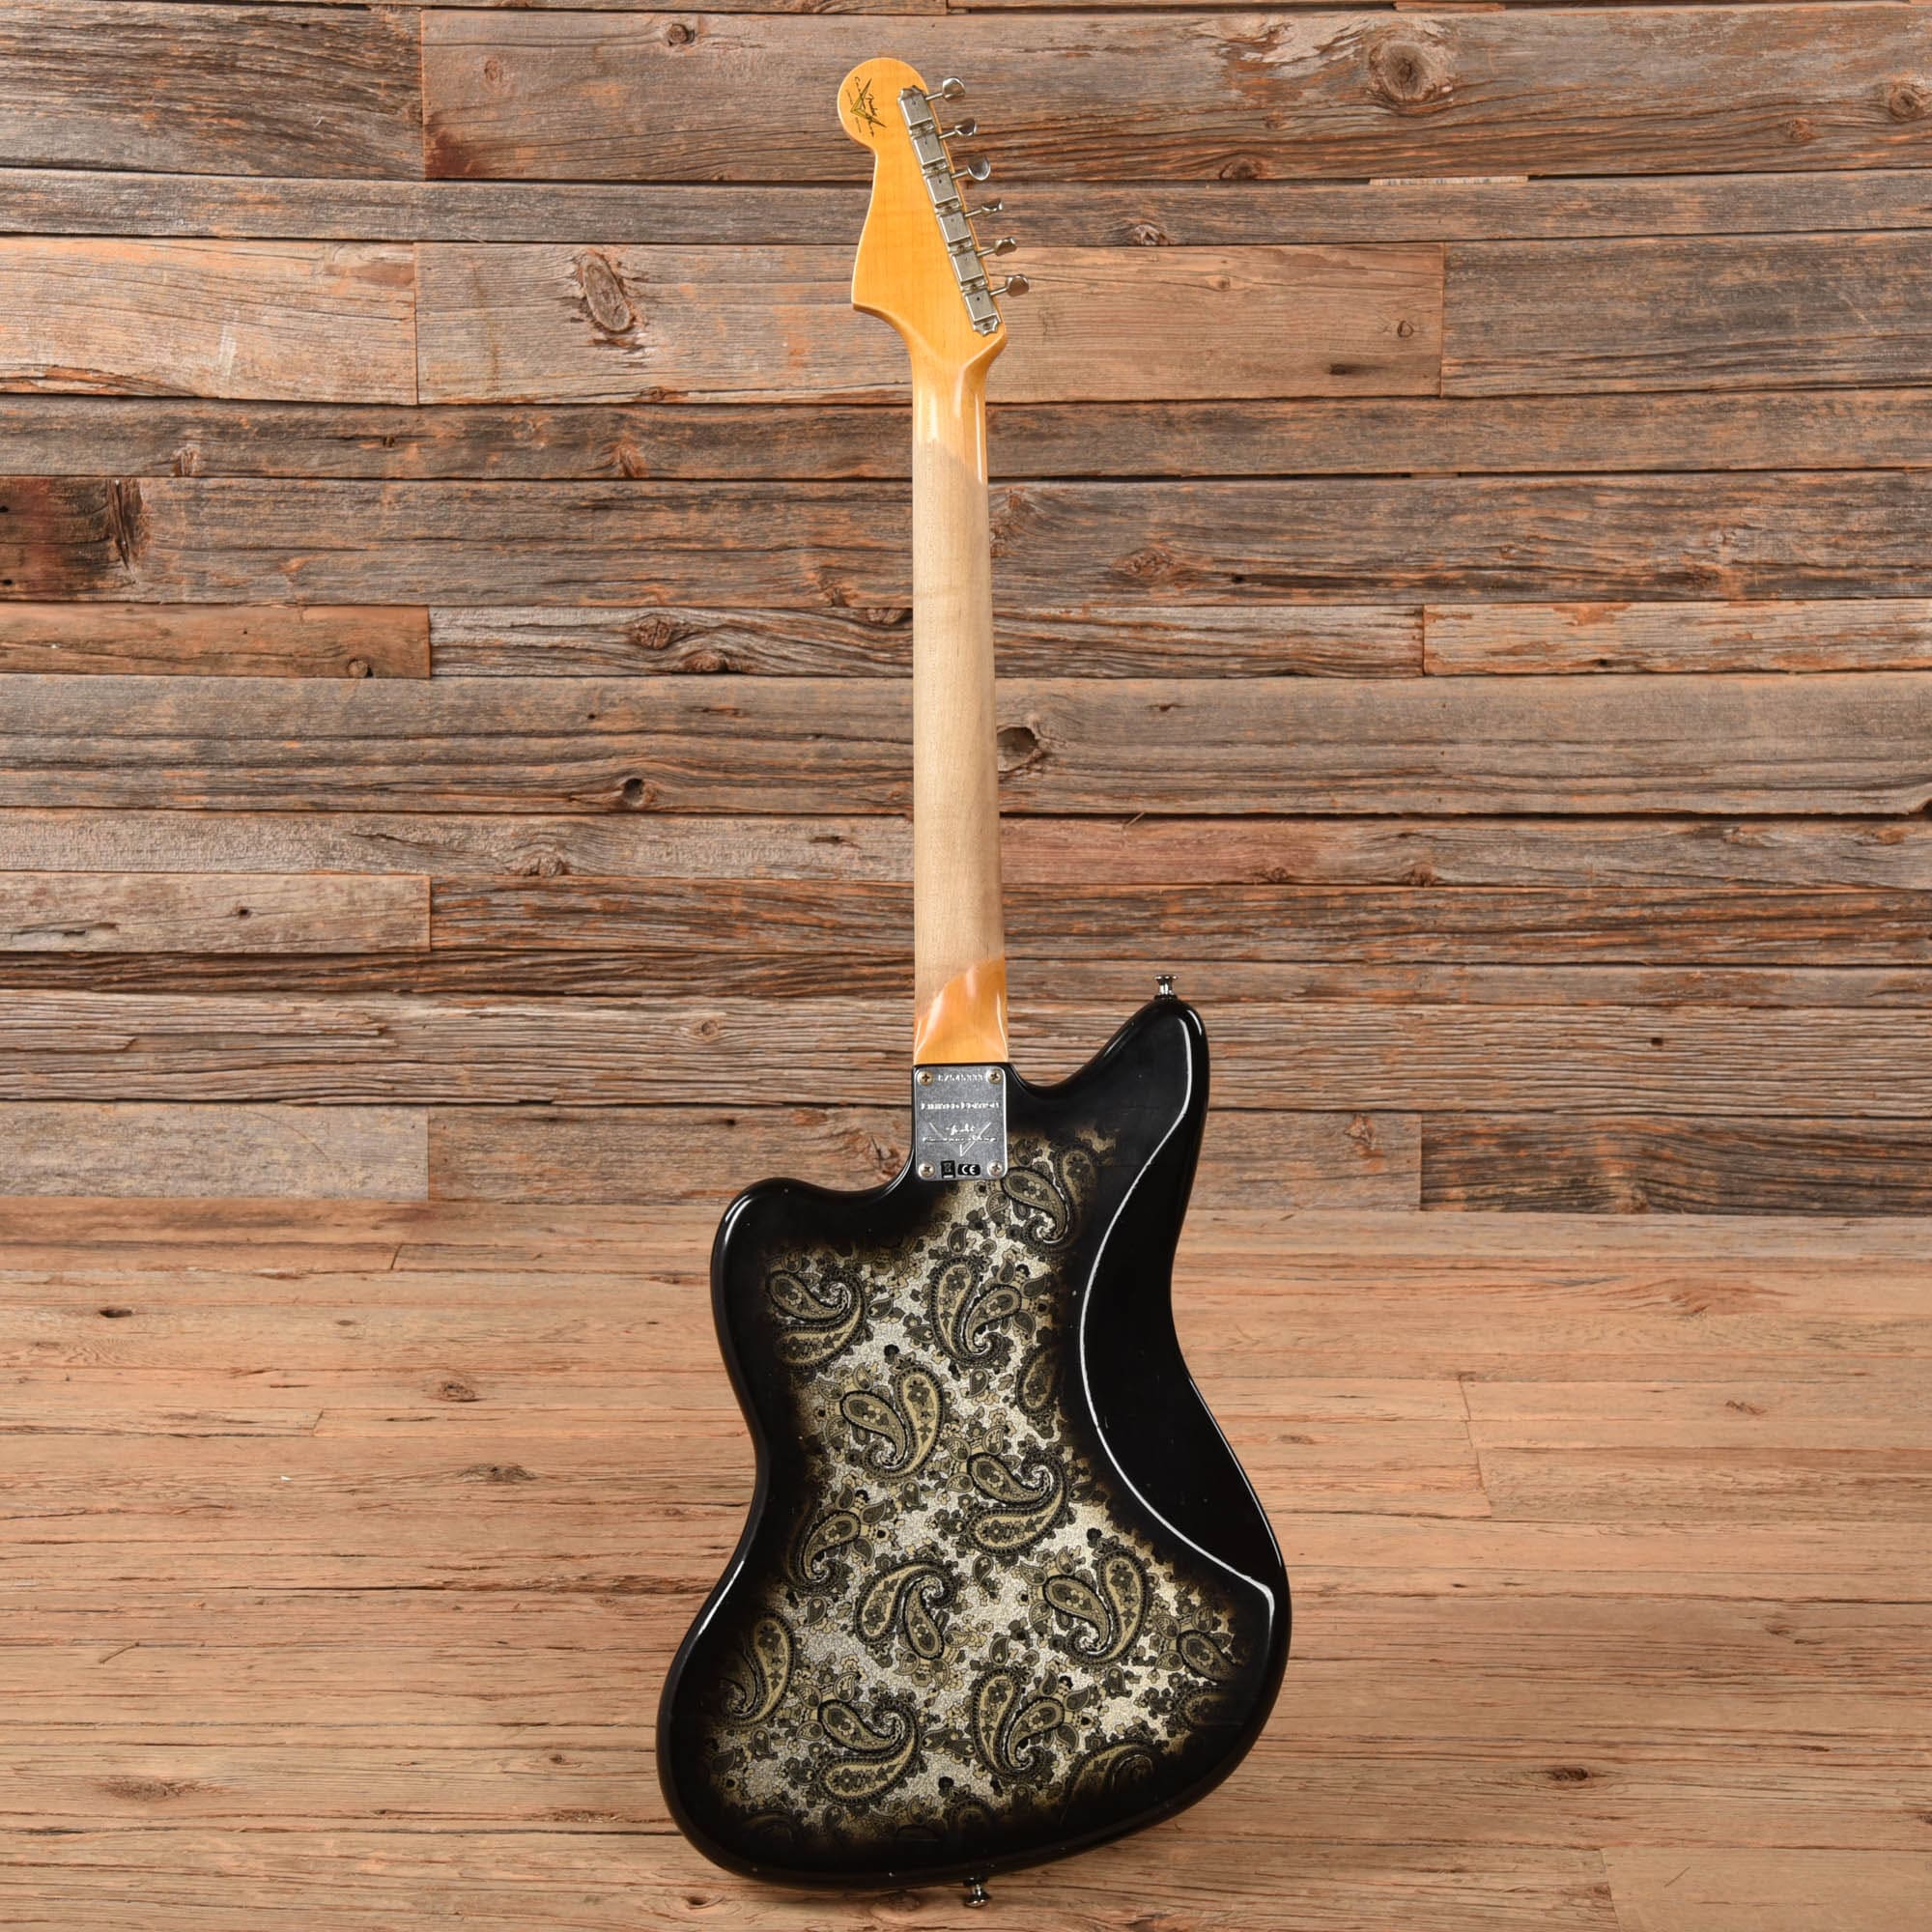 Fender Custom Shop Limited Edition Black Paisley Jazzmaster Journeyman Relic Black Paisely 2018 Electric Guitars / Solid Body